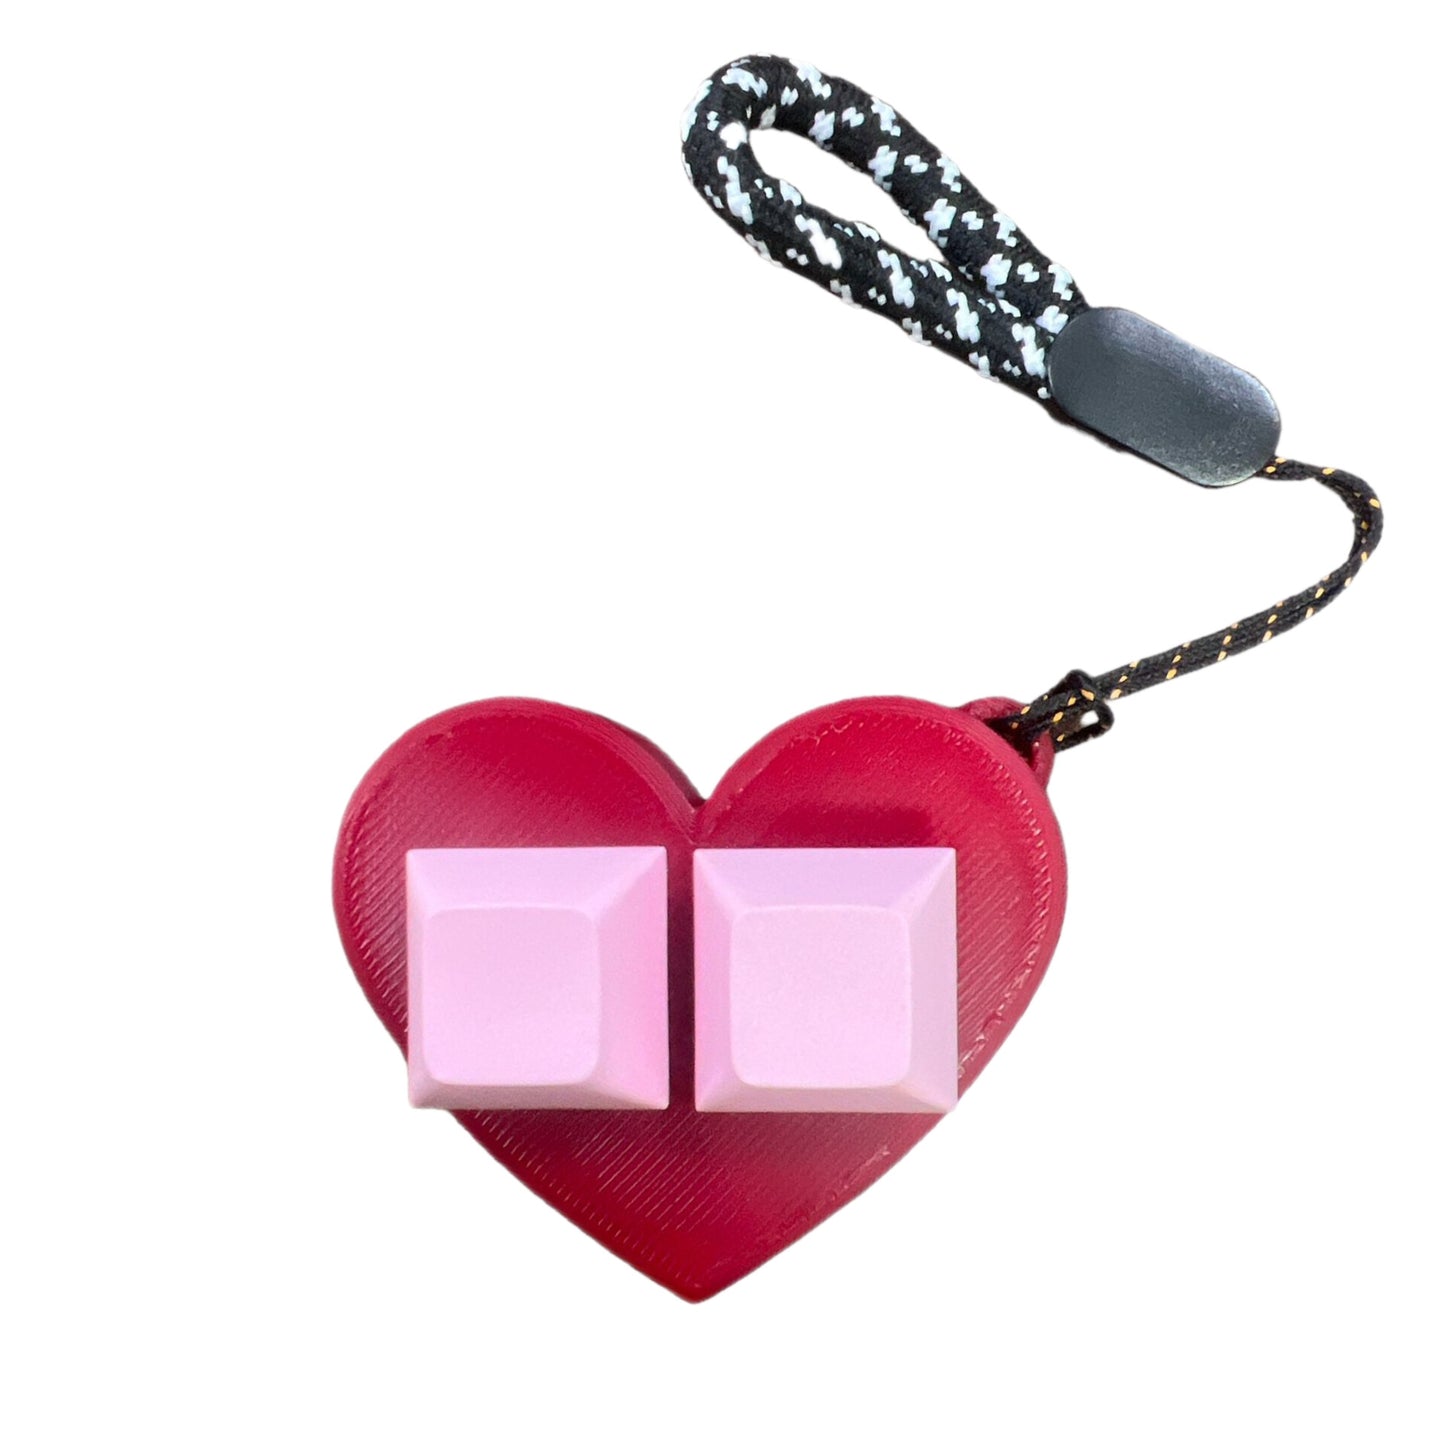 It's a 3D heart-shaped finger fidget. With keyboard keys to keep your fingers busy and it is on a keychain and it's red with pink keys